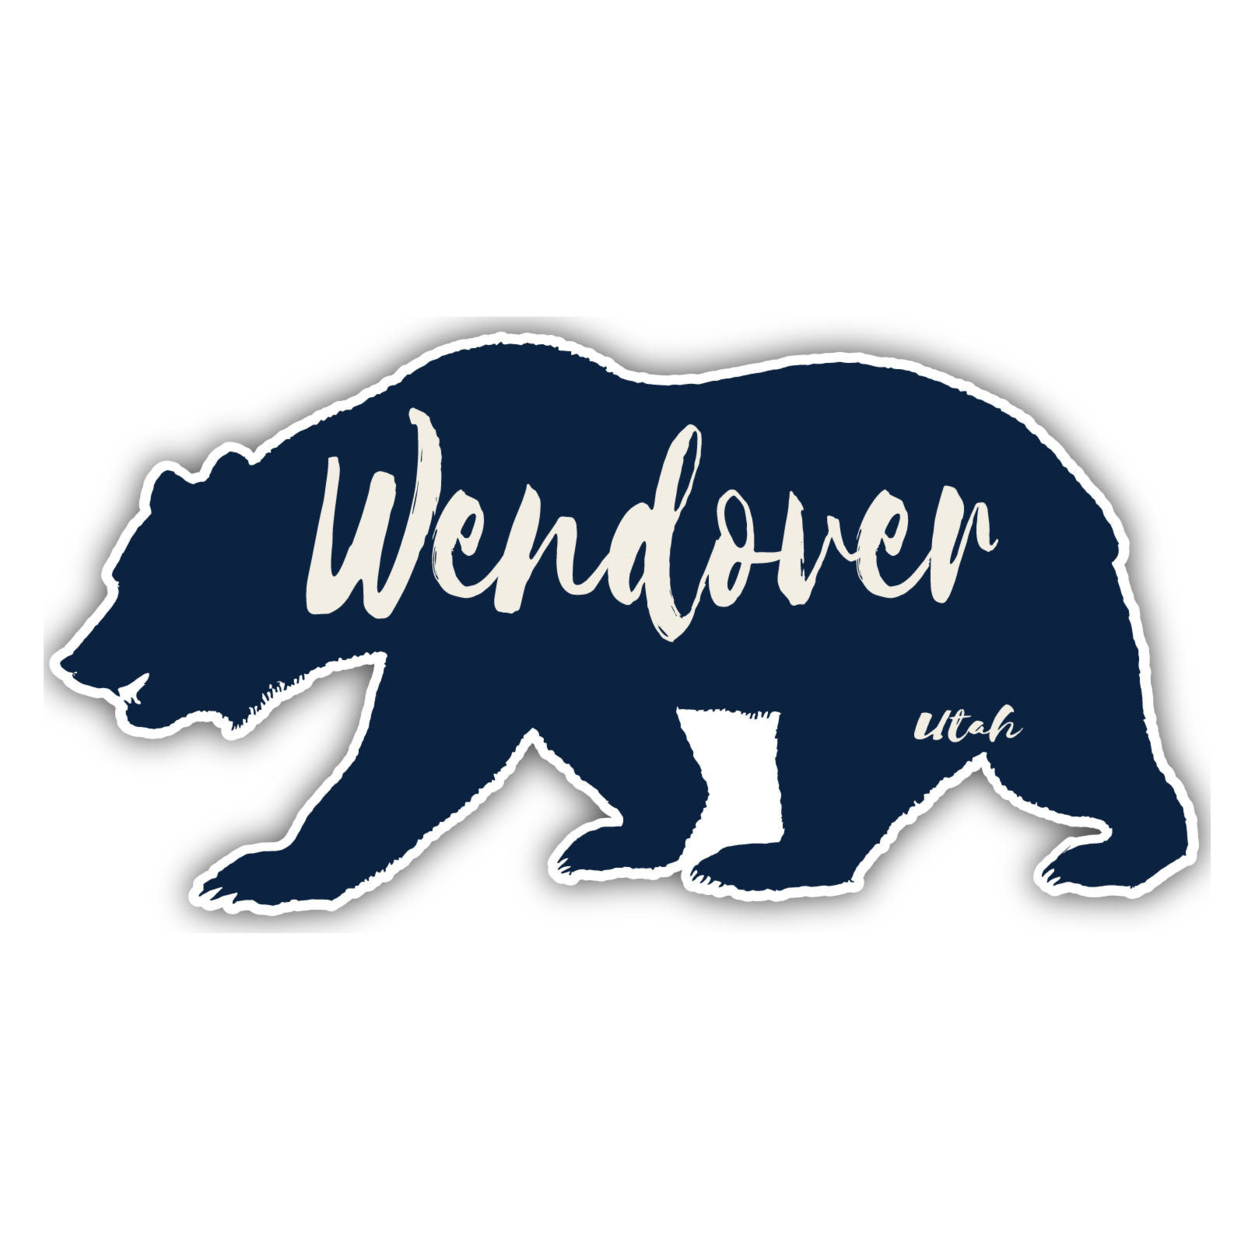 Wendover Utah Souvenir Decorative Stickers (Choose Theme And Size) - Single Unit, 2-Inch, Great Outdoors